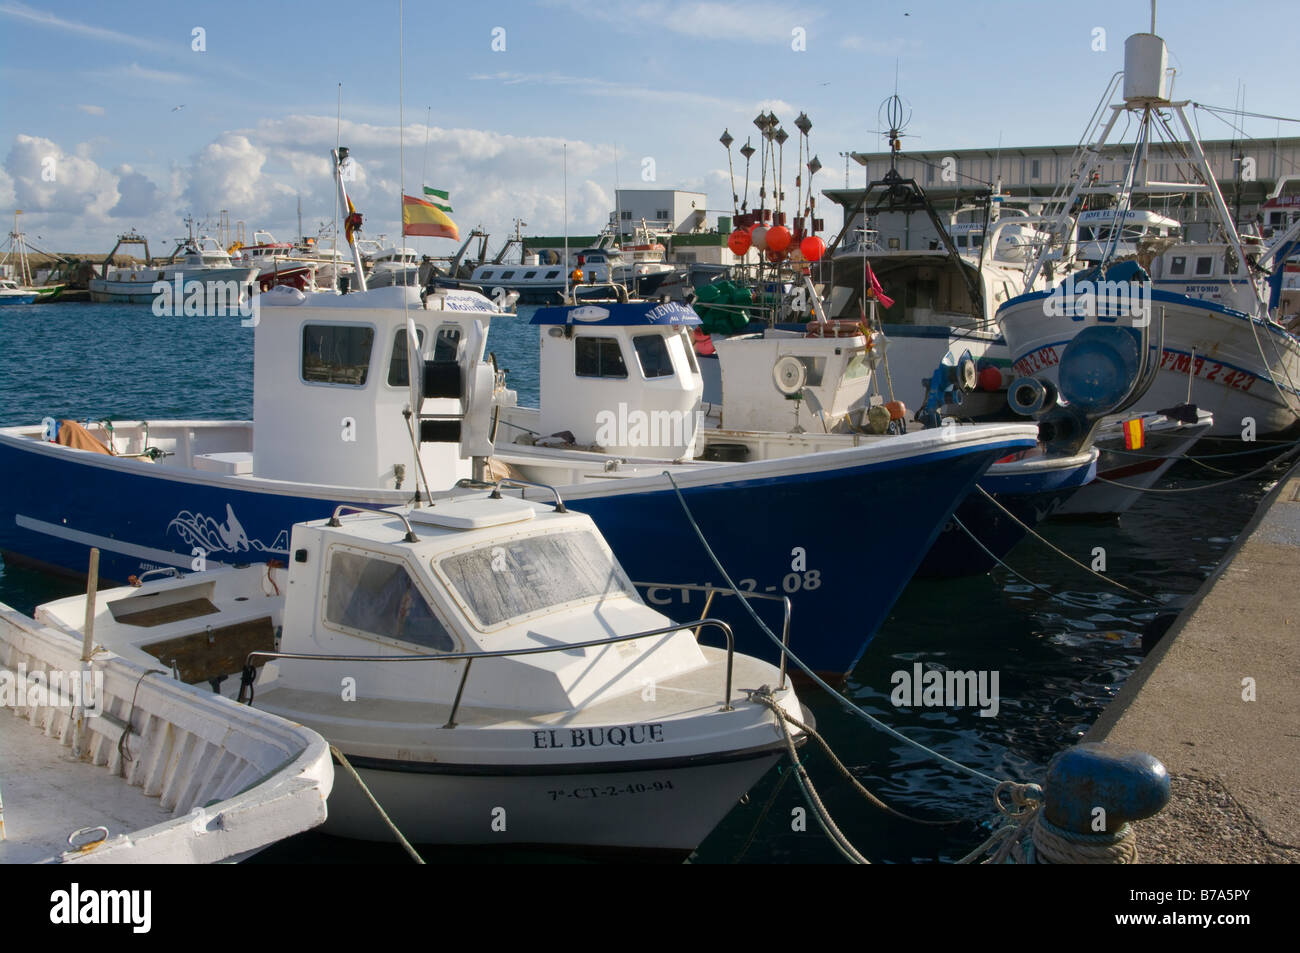 Spanish Commercial Fishing Boats Trawlers Moored At The Quayside in Garrucha Harbour Almeria Spain Stock Photo